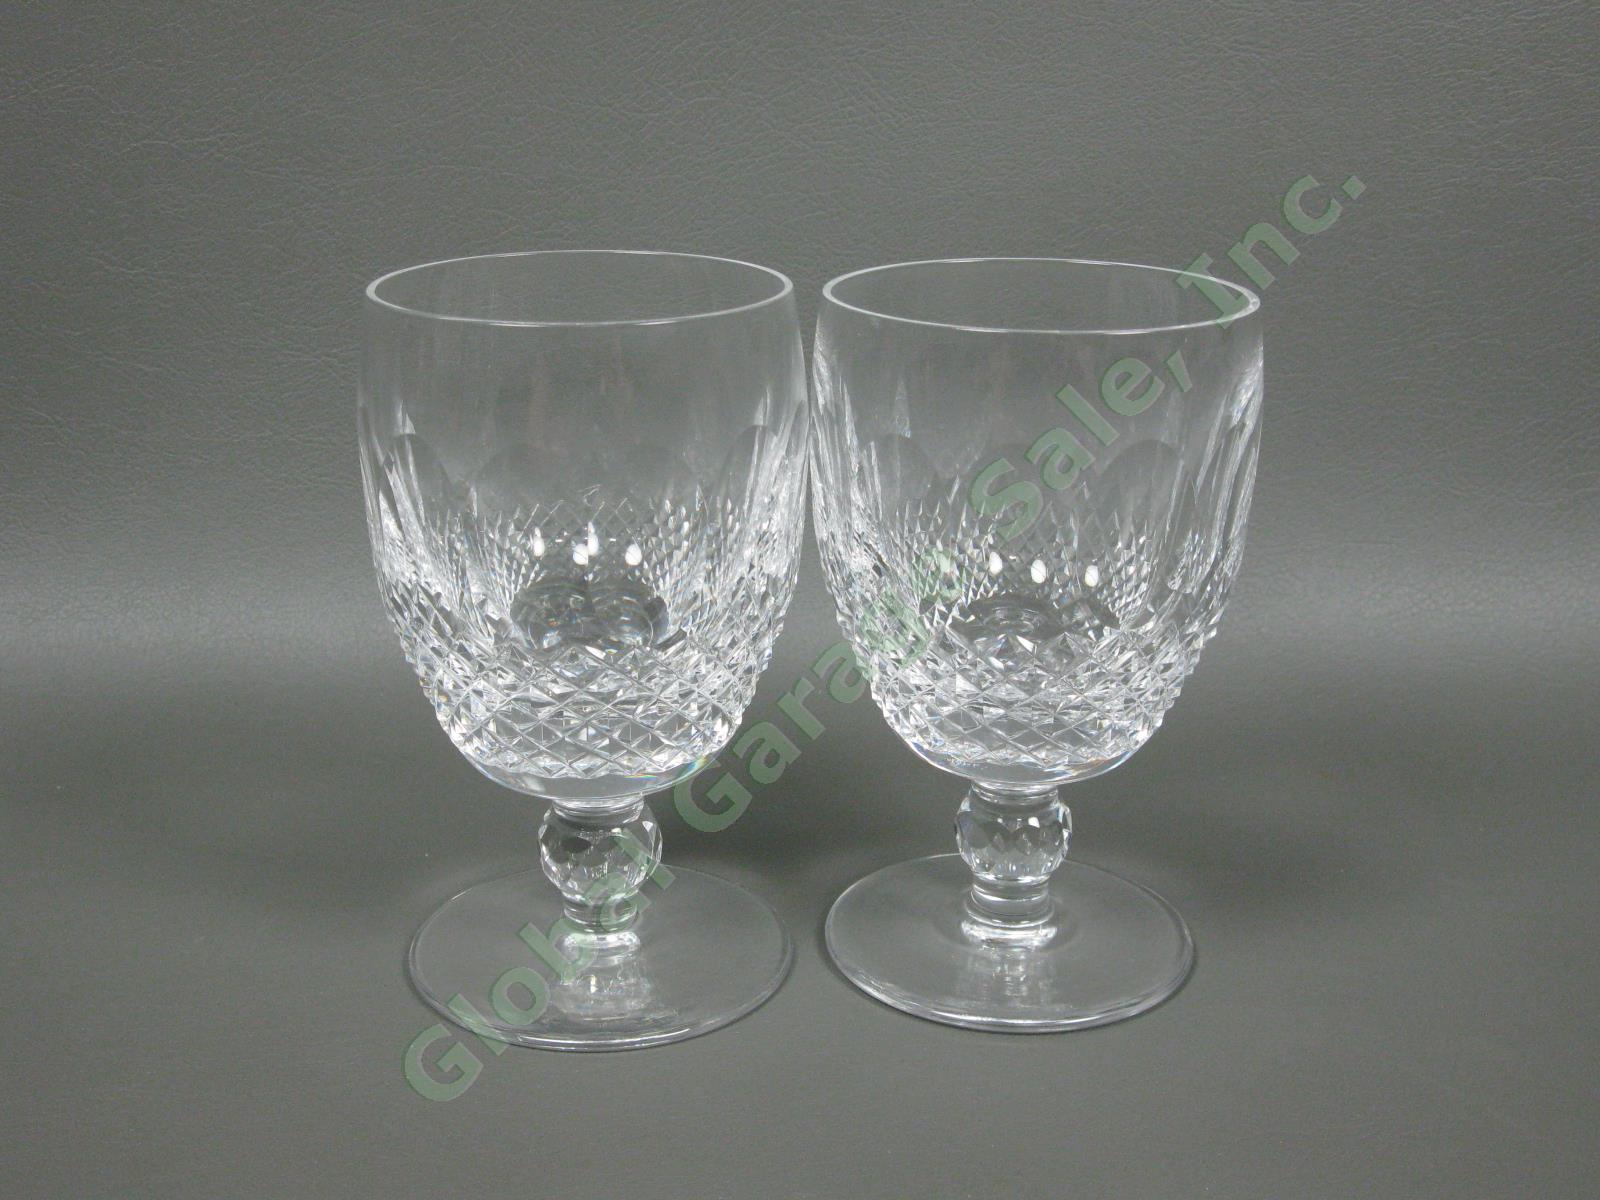 4 Waterford Crystal Colleen 5 1/4" Water Goblet Wine Glass Set Vintage Retired 3